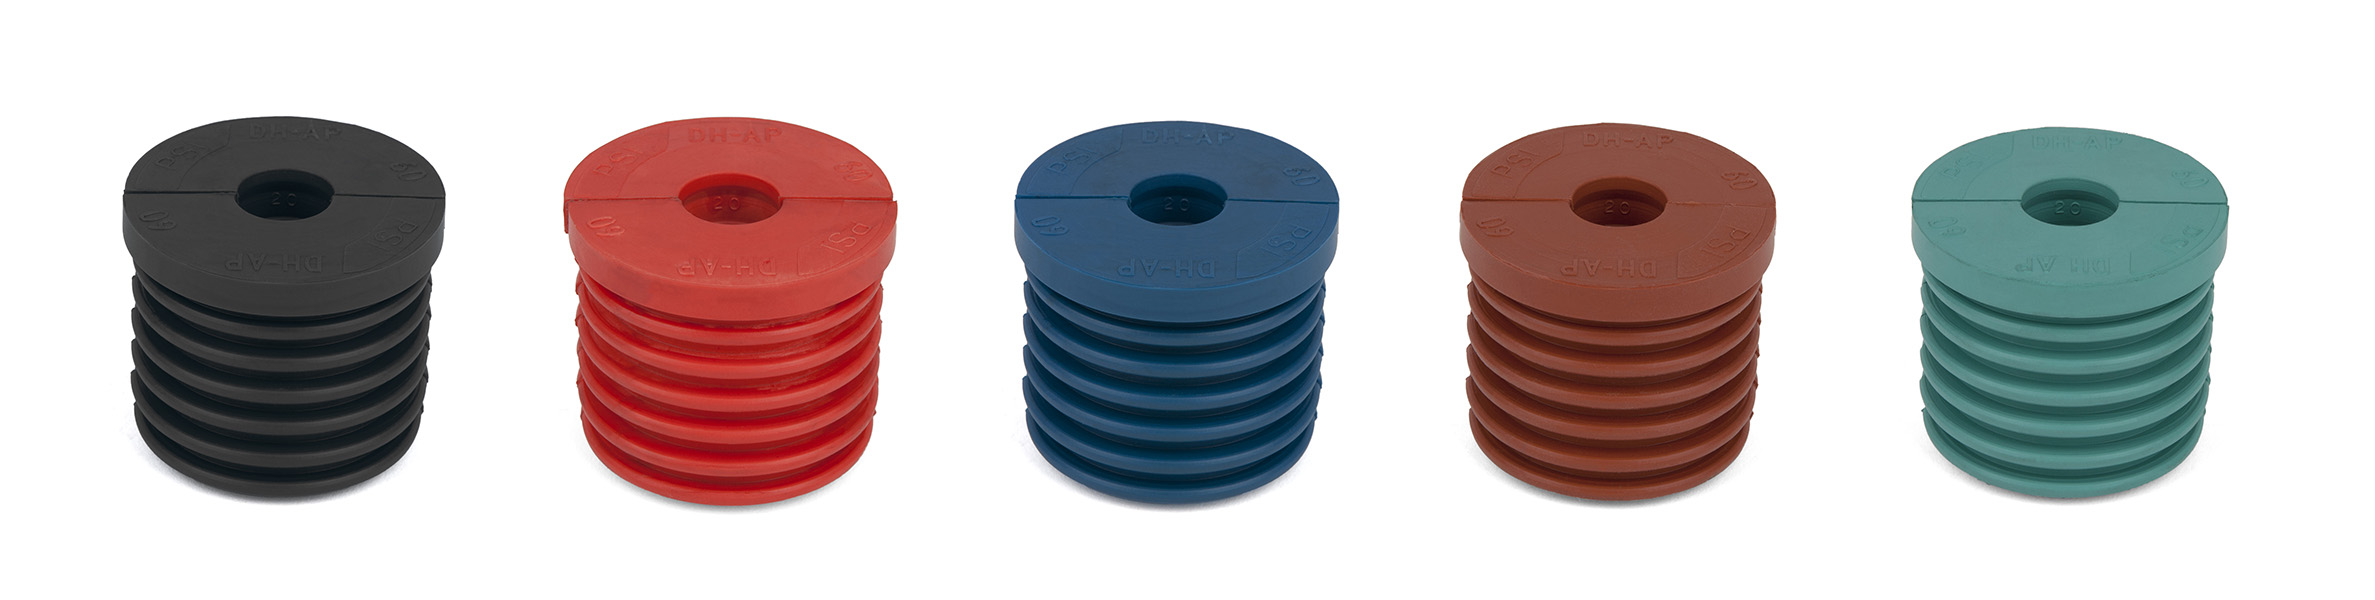 different types and colors of sealing plugs